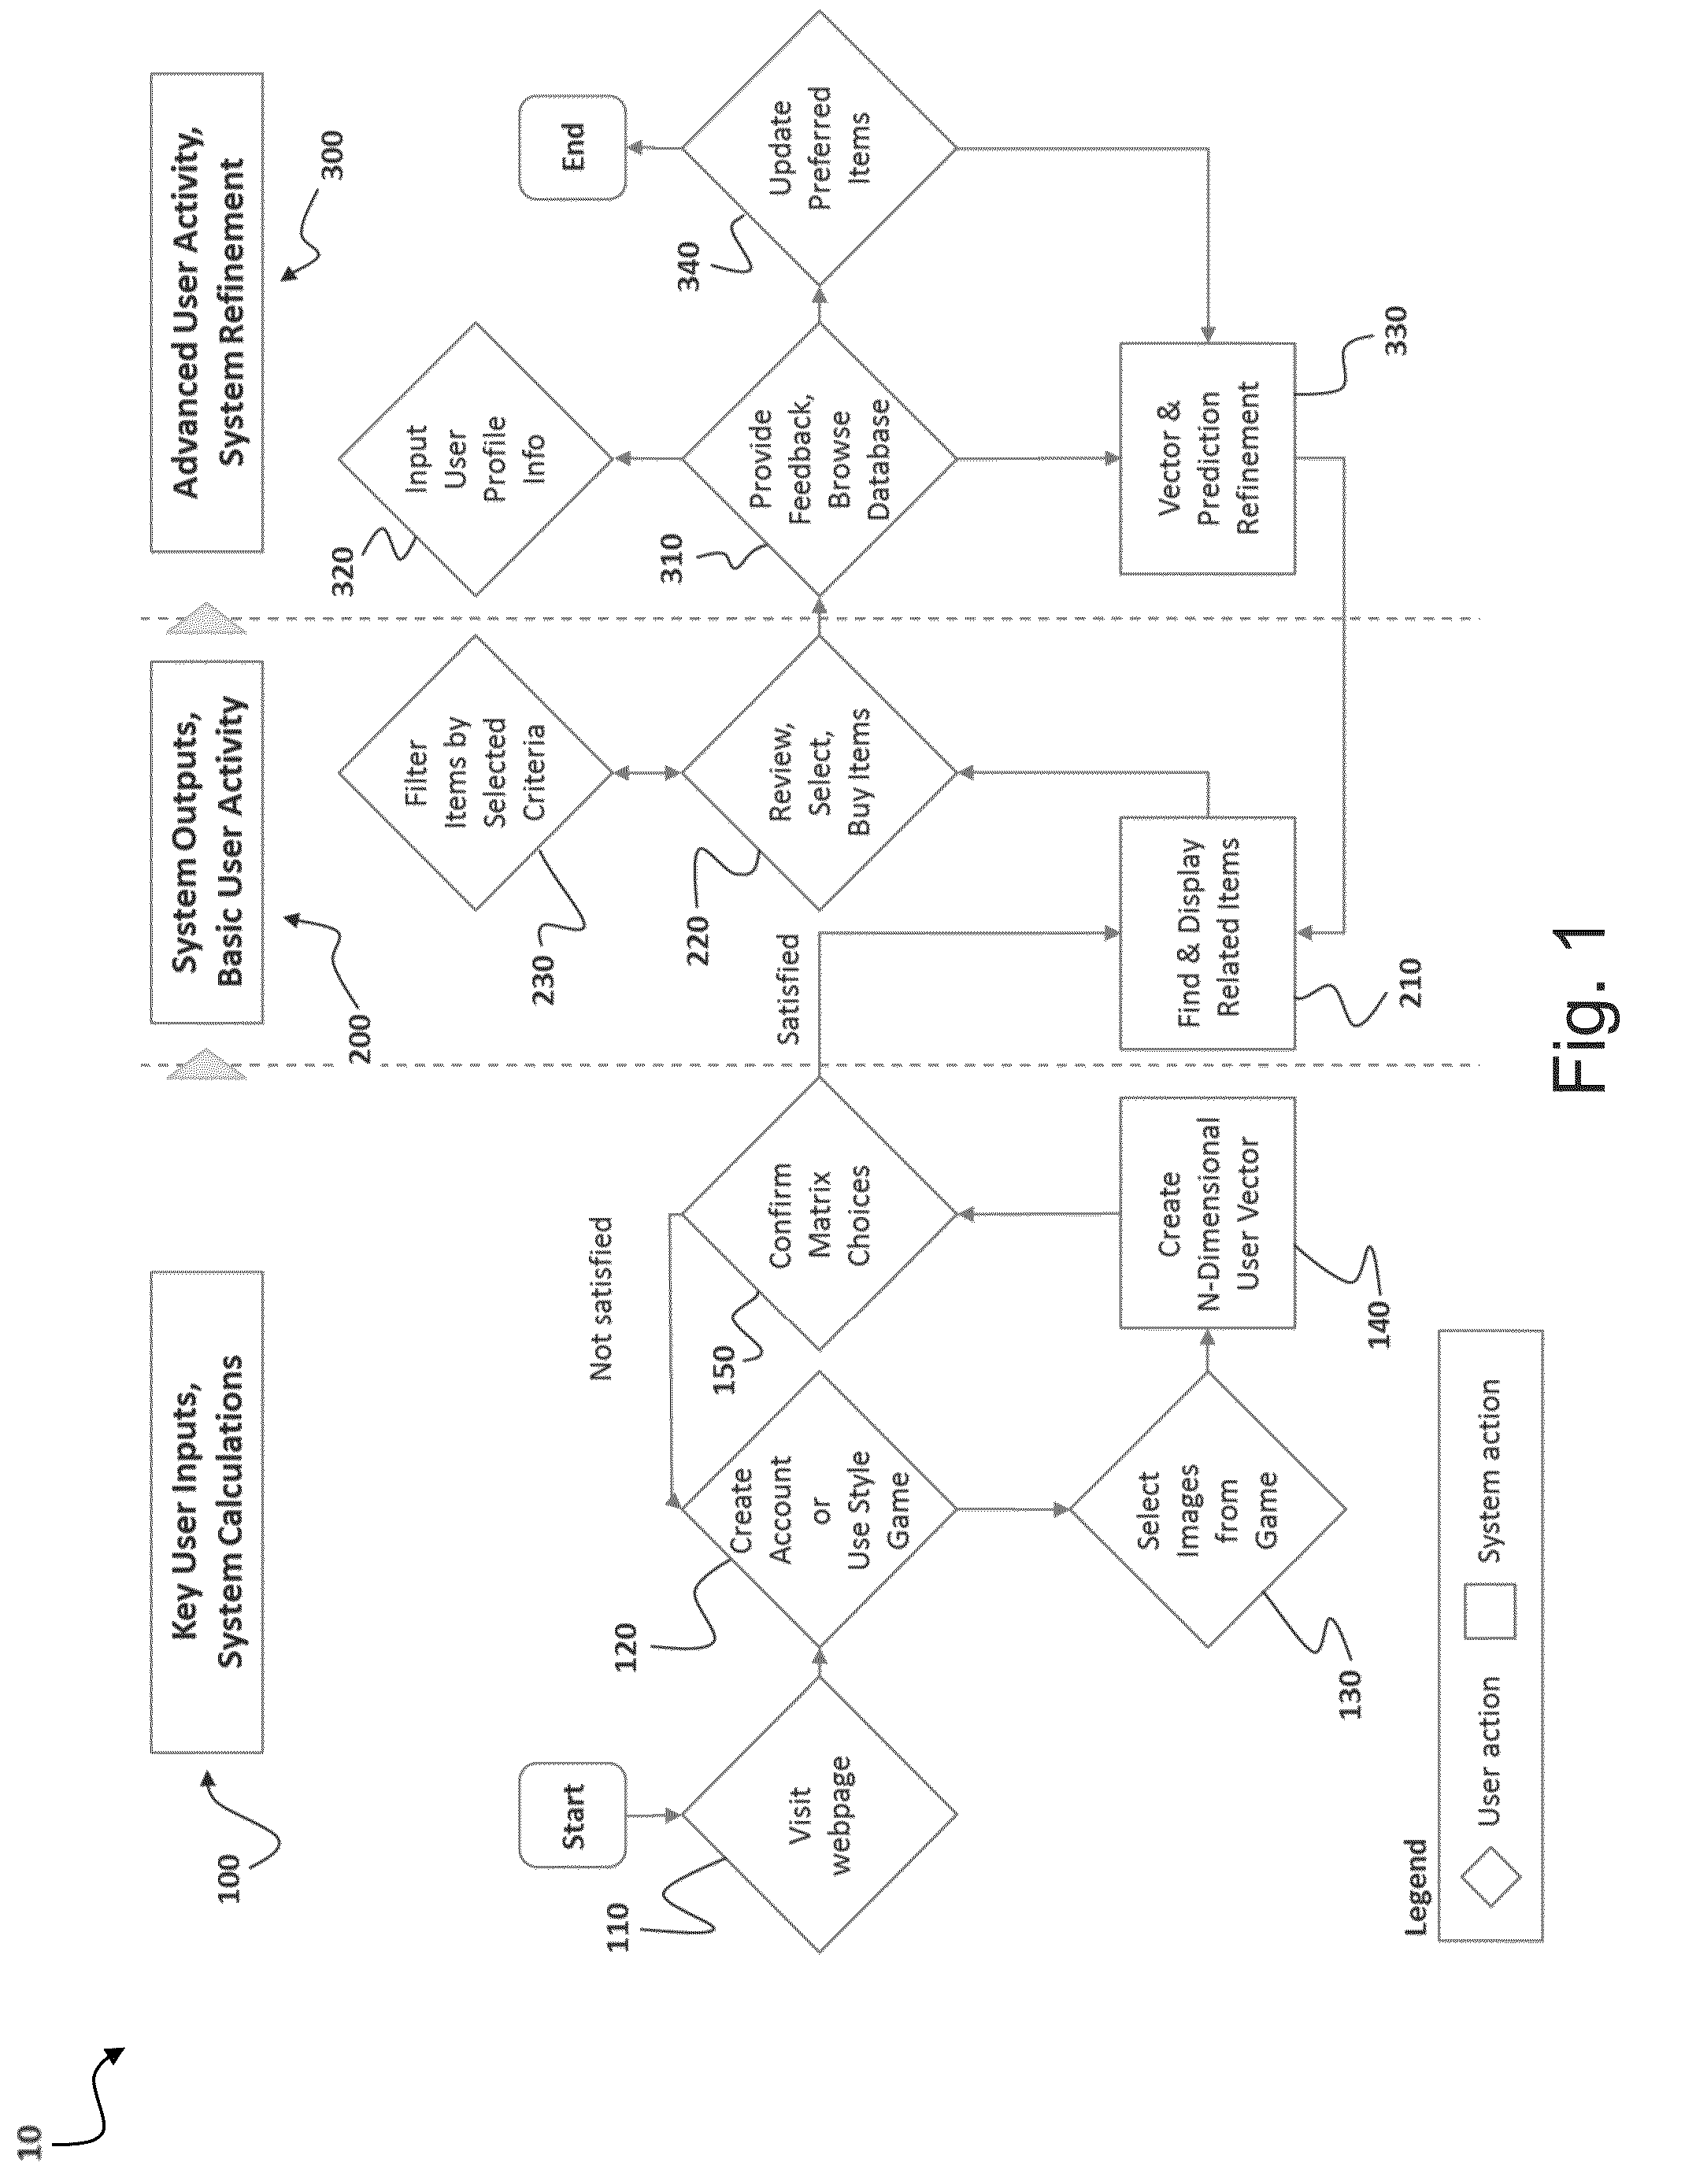 Method and system for personalized recommendation of lifestyle items